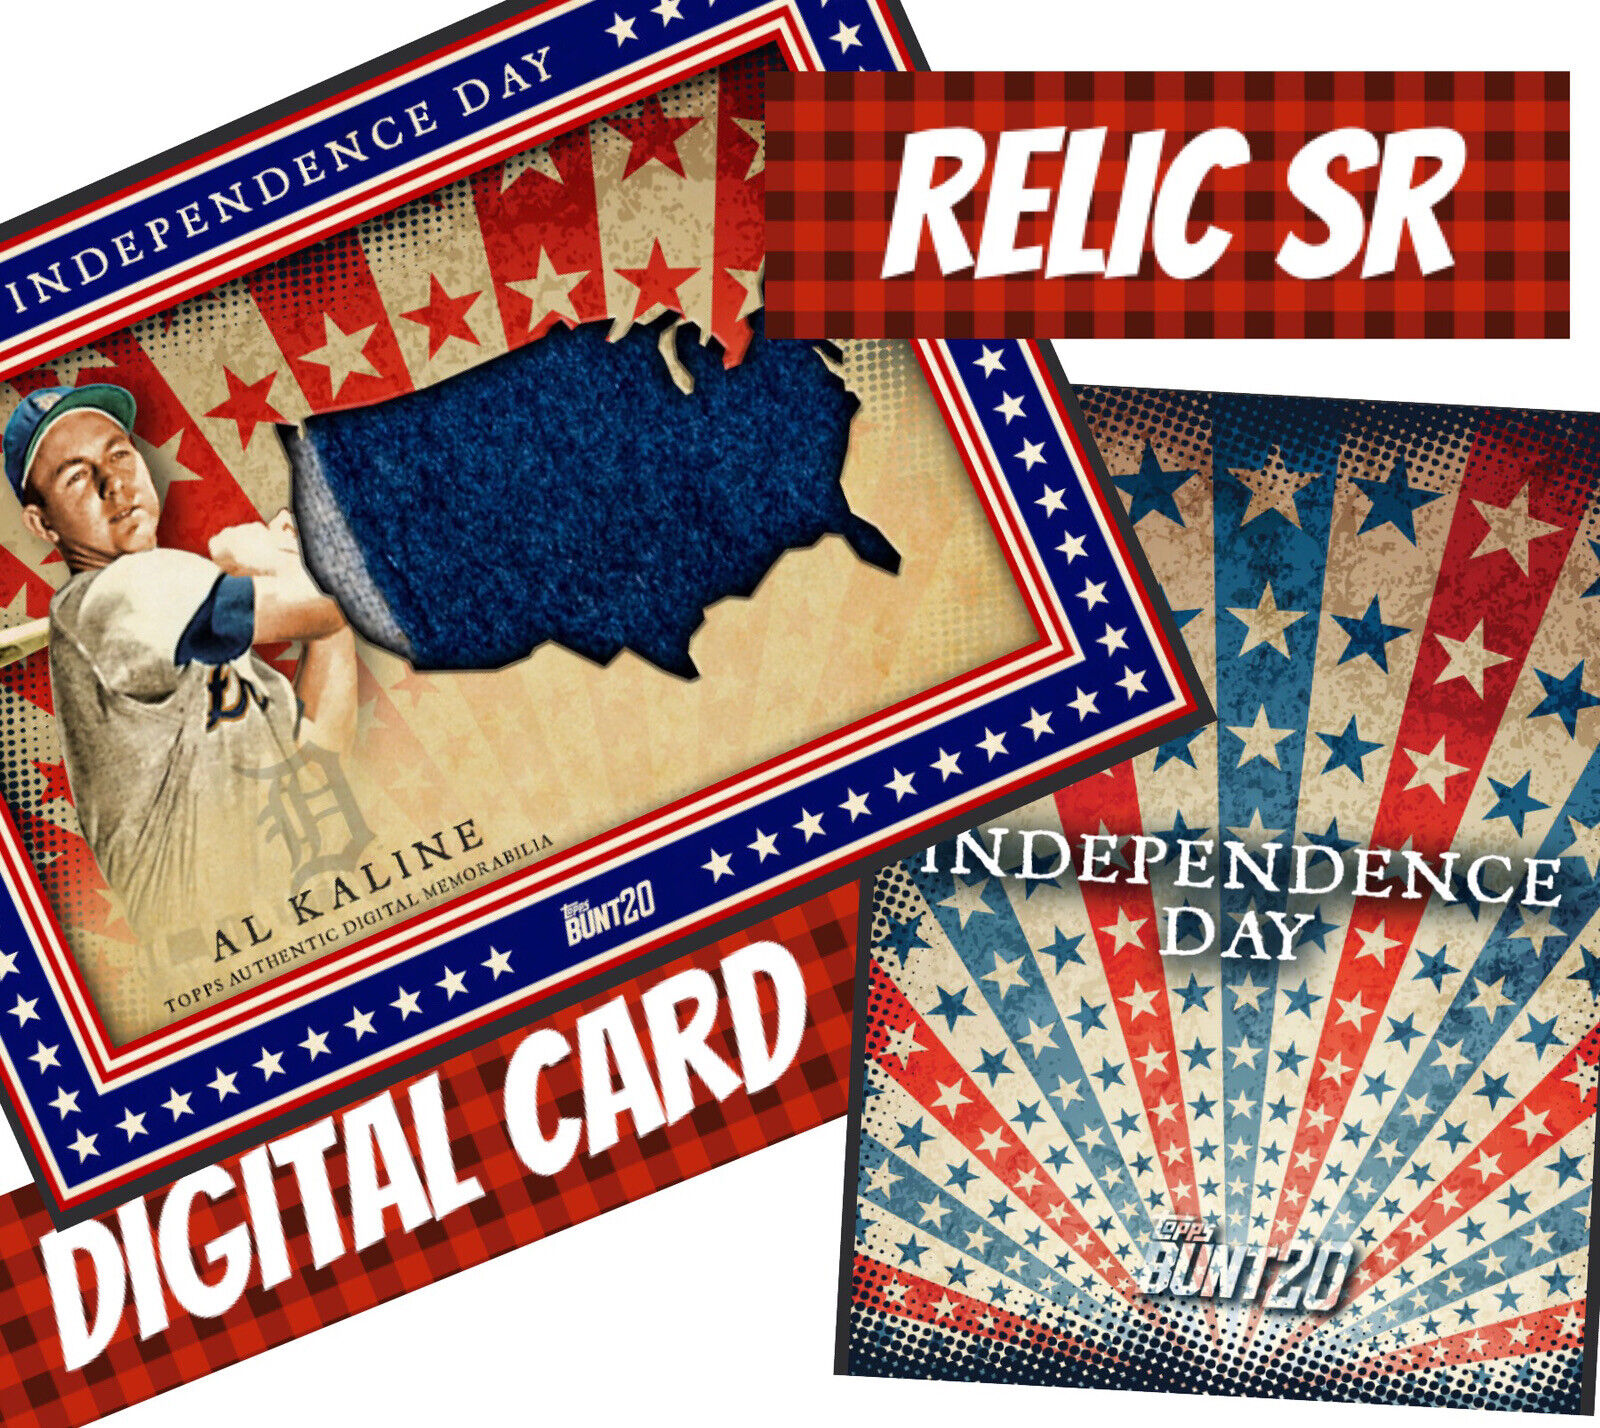 2020 Topps Colorful Digital Al Kaline Independence Day 20 Red Relic